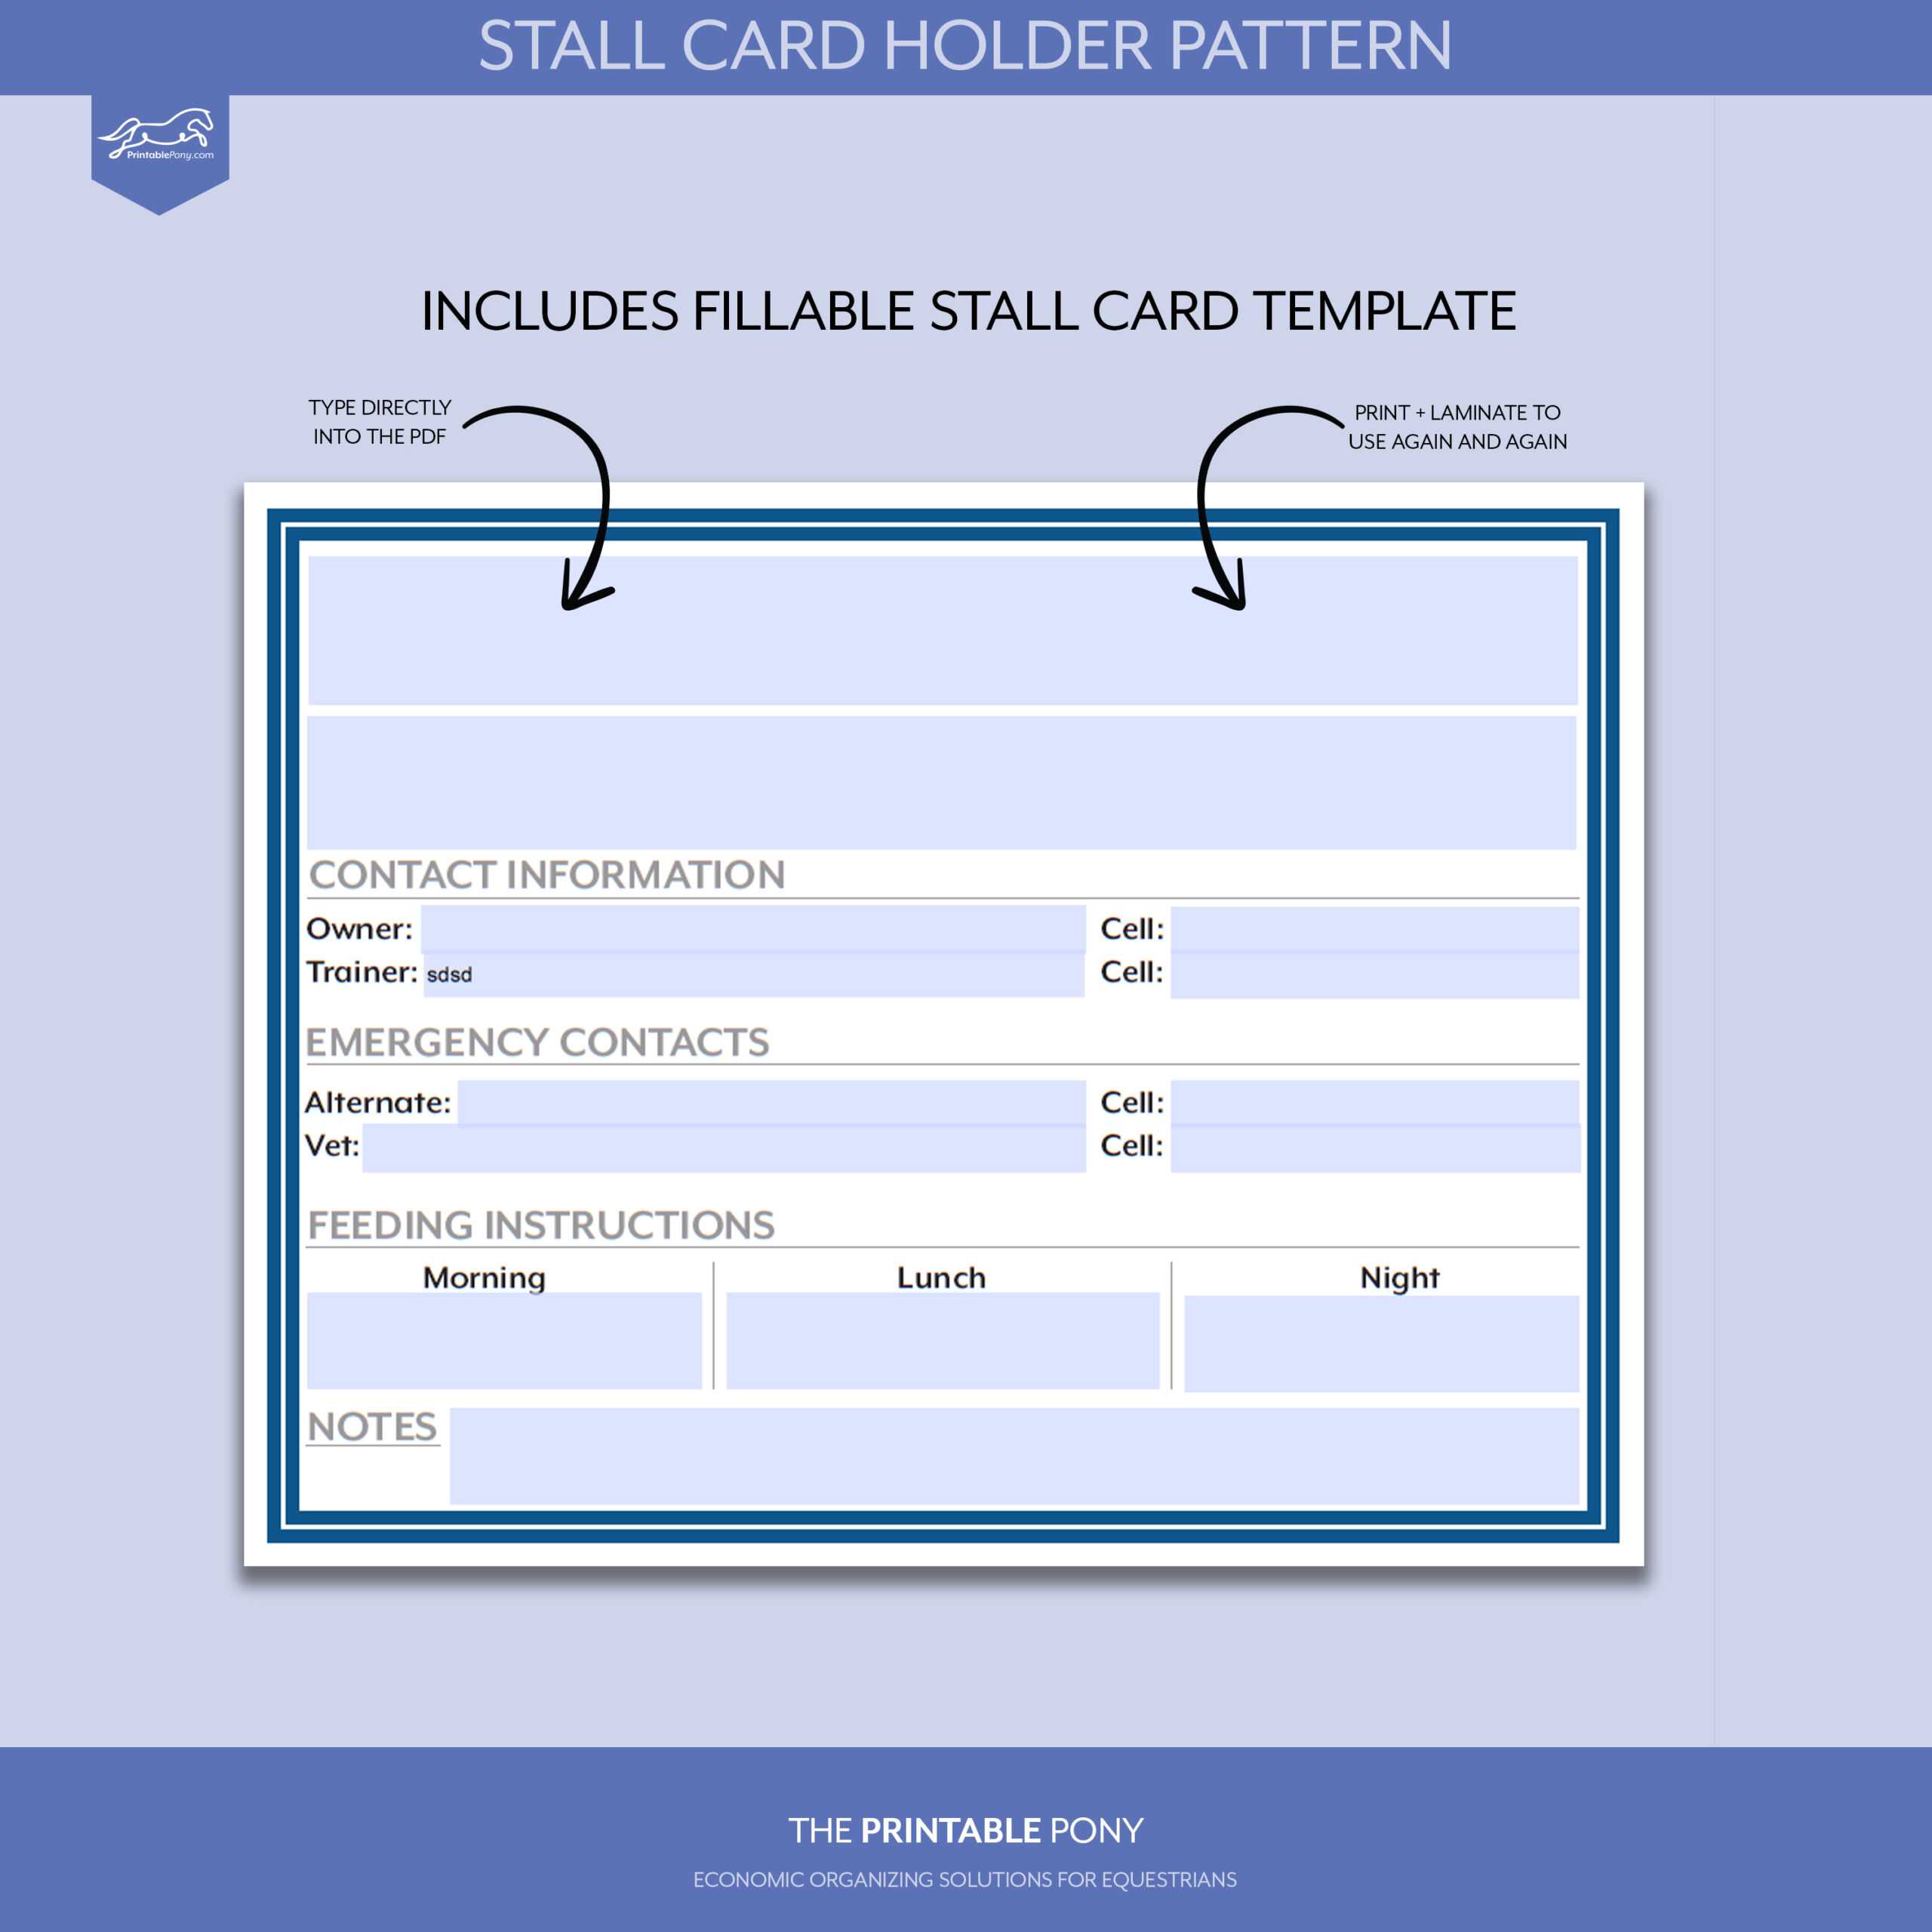 Stall Card Holder Pattern + Printable Stall Card With Horse Stall Card Template